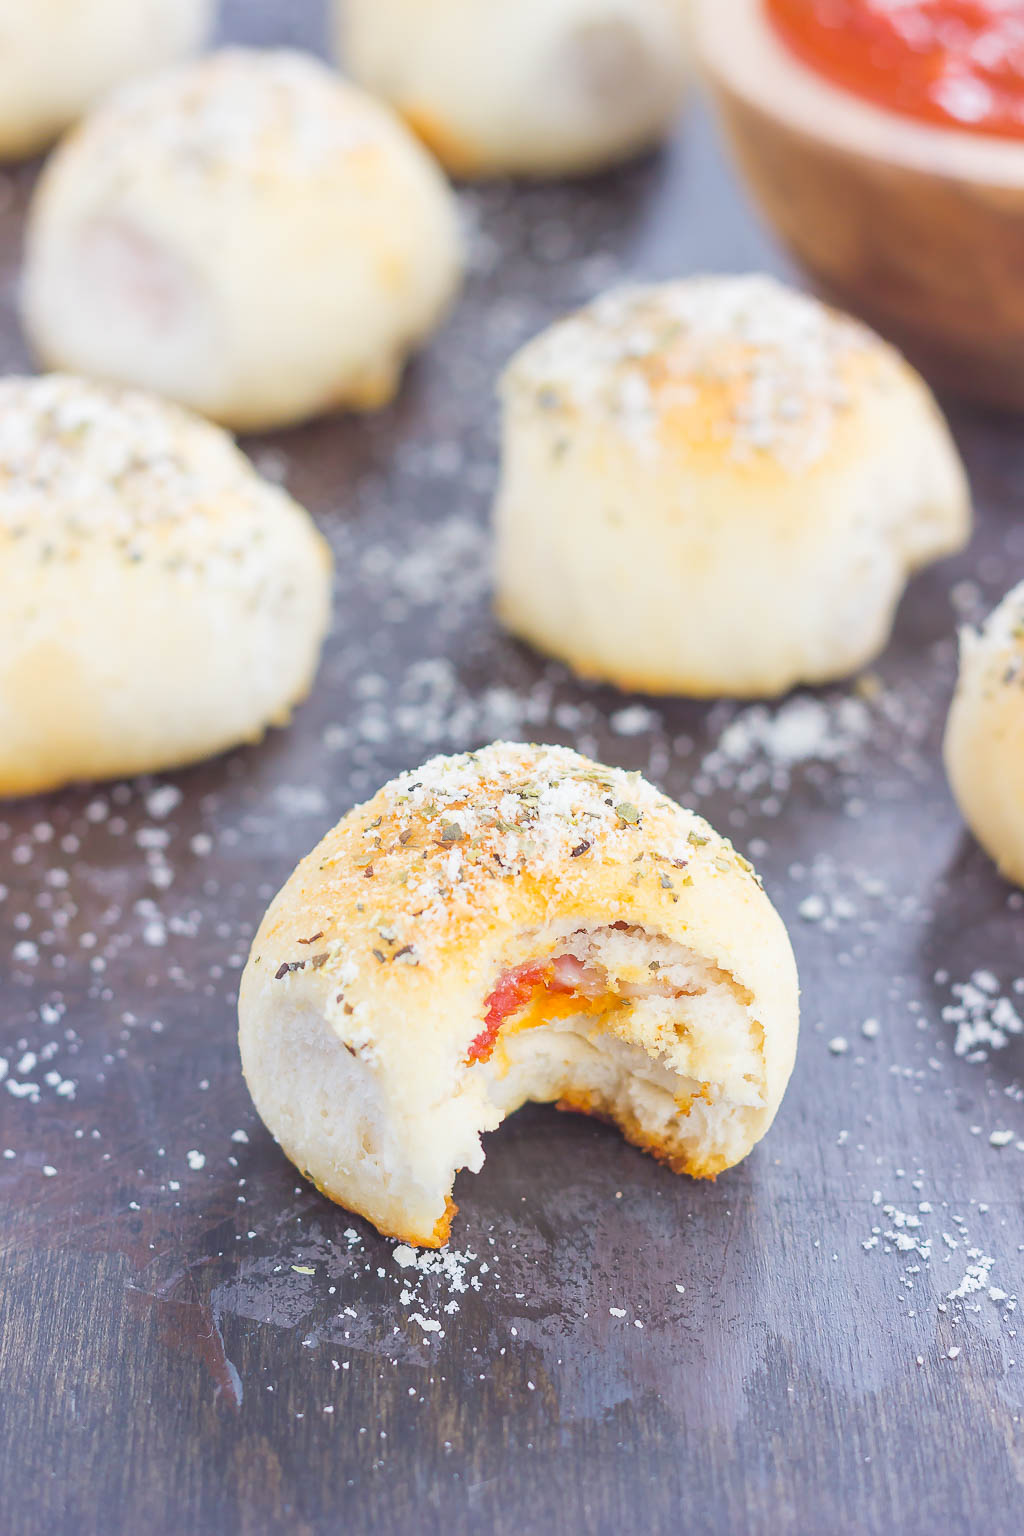 These Stuffed Pizza Rolls taste just like your favorite pizza, combined into a roll and drizzled with a zesty, buttery glaze!